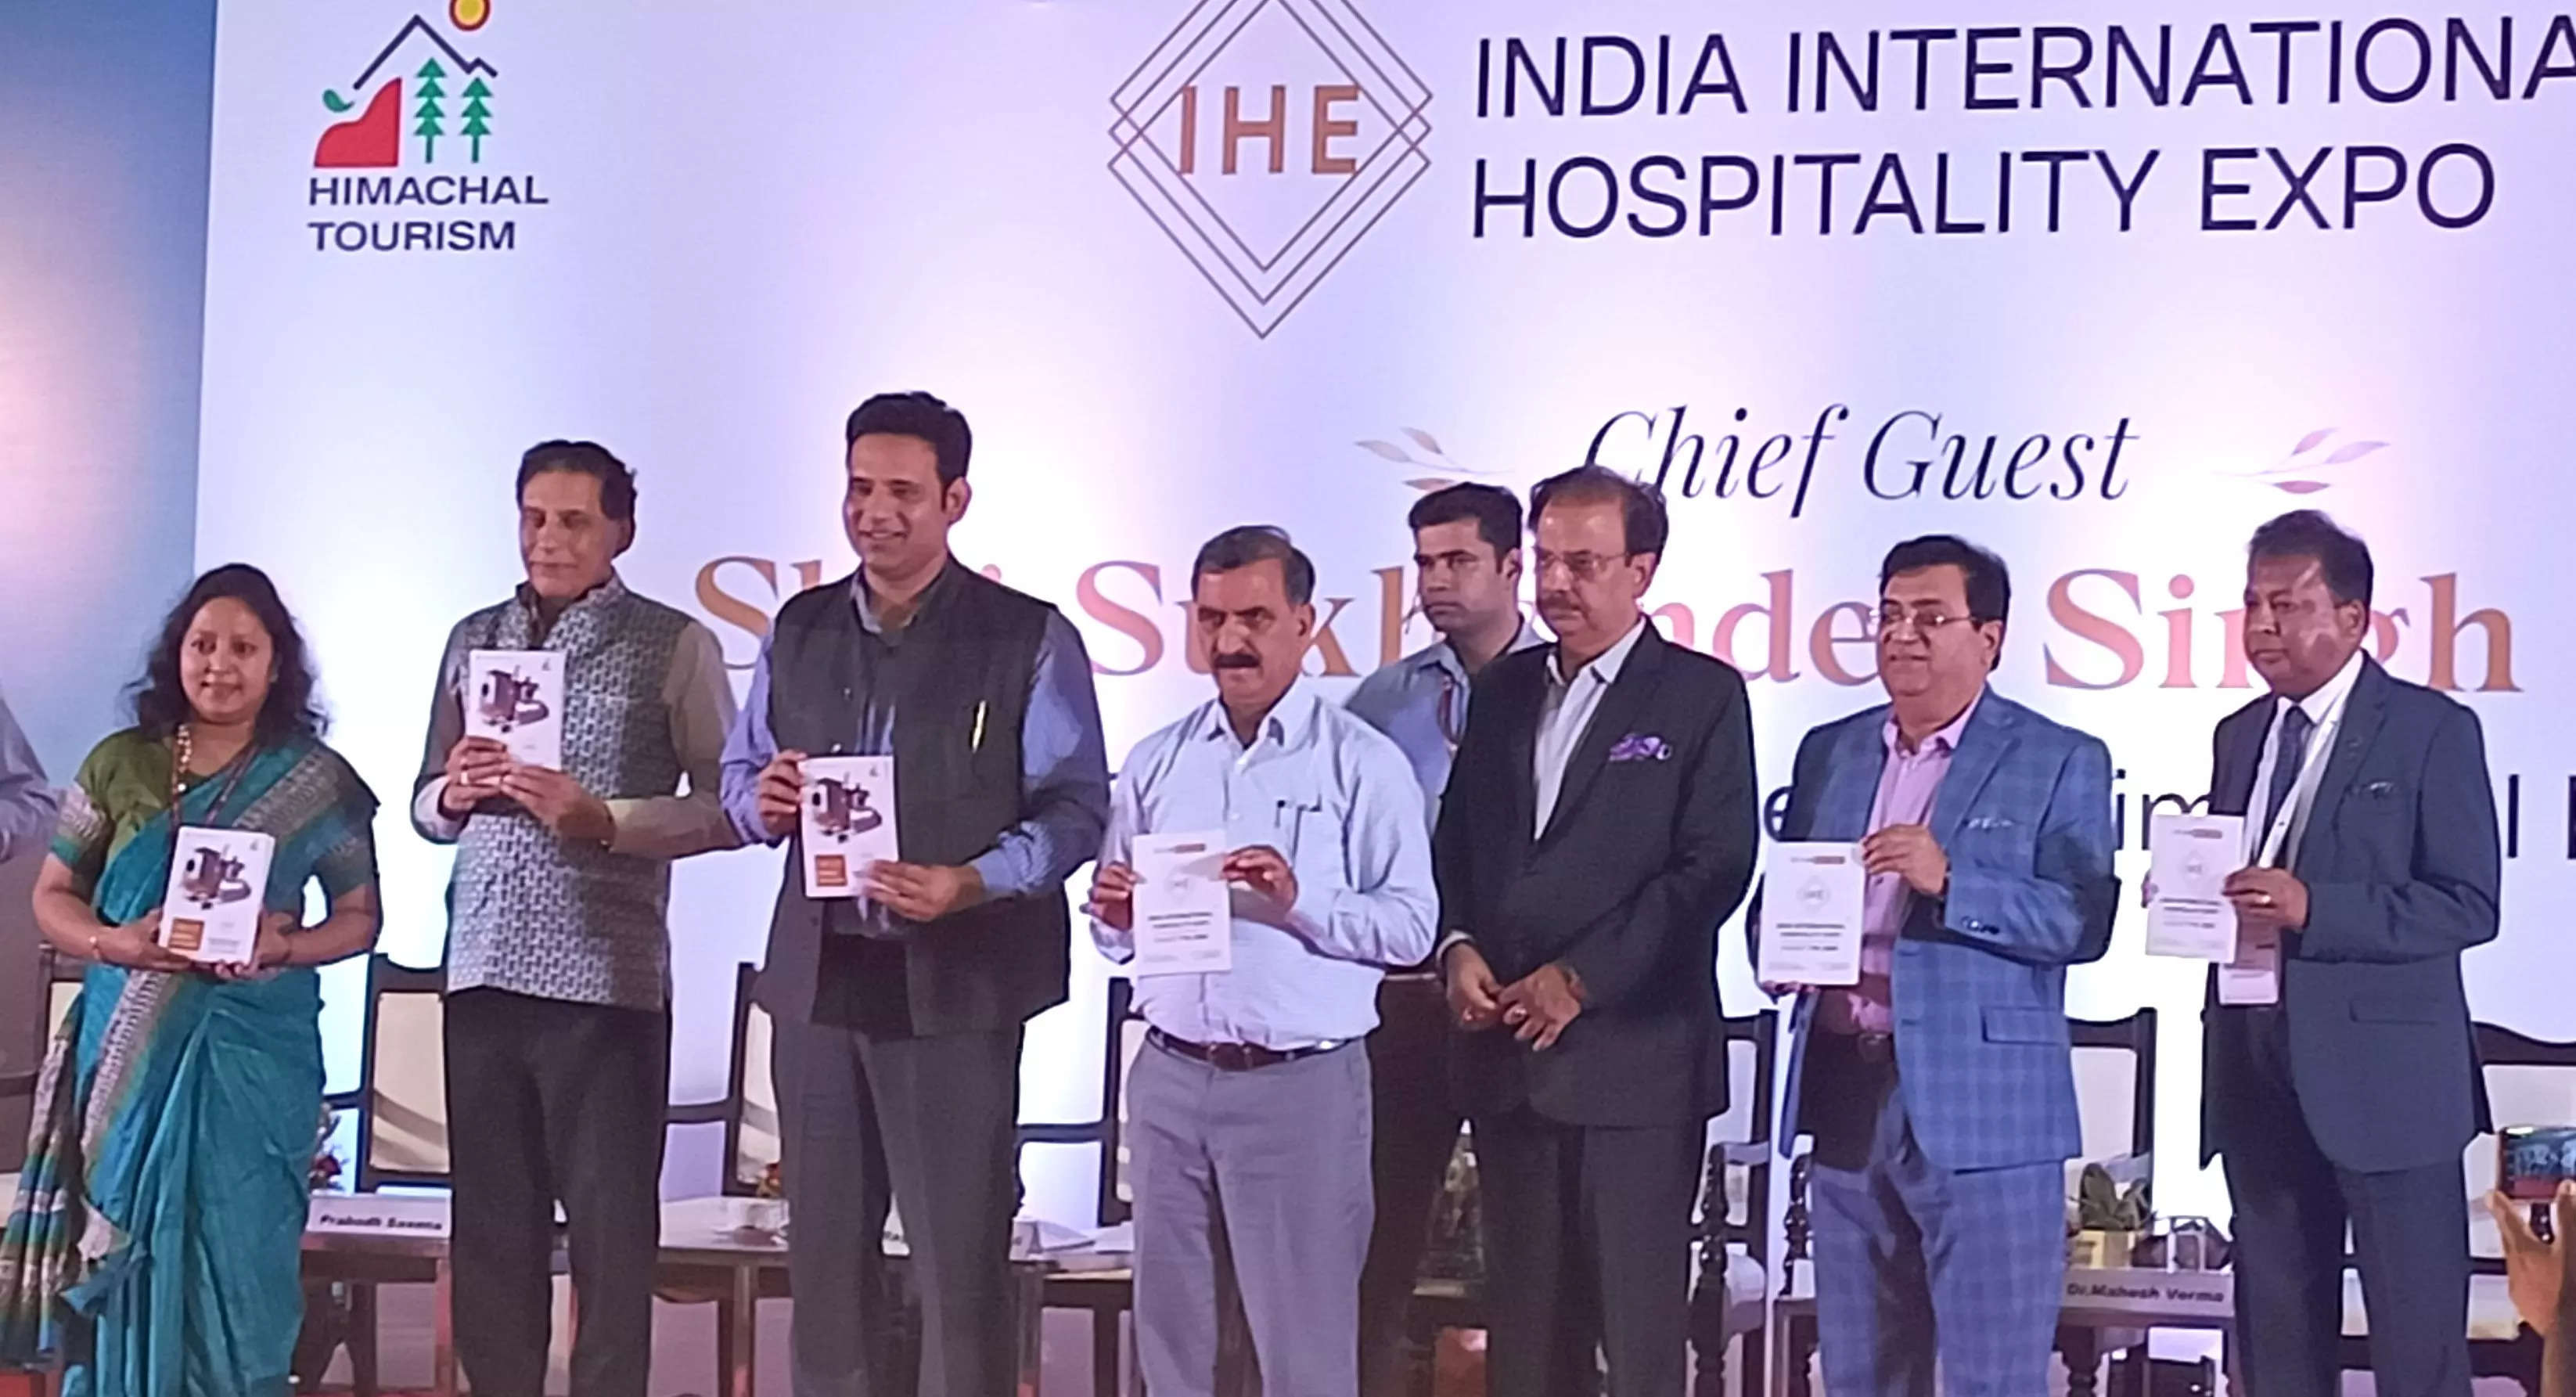 <p>Inauguration of the sixth edition of the International Hospitality Expo (IHE) at India Exposition Mart Limited (IEML) in Greater Noida.</p>